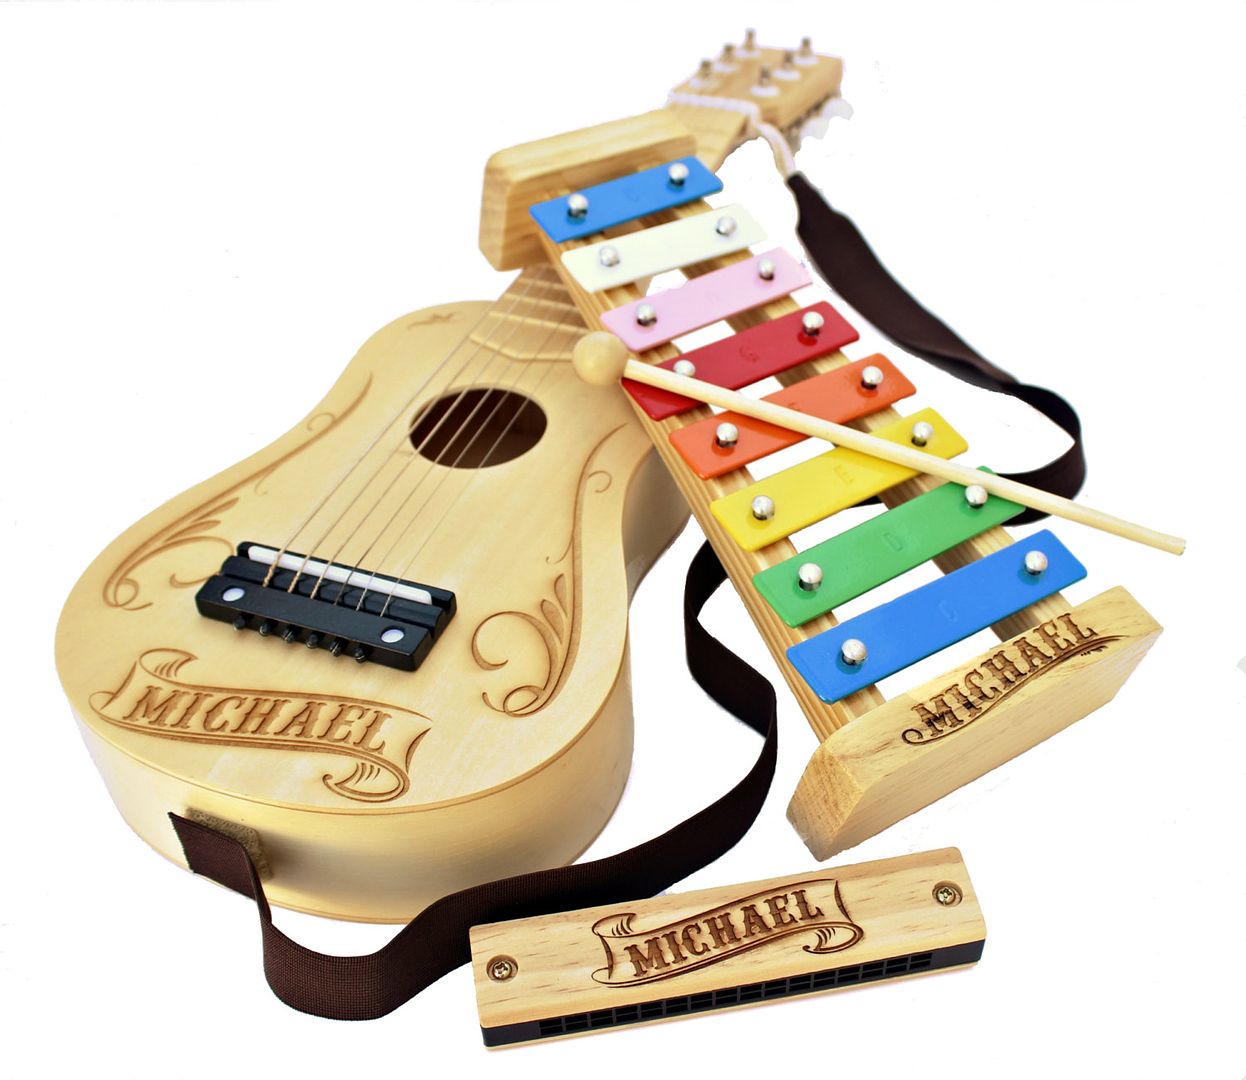 Personalized holiday gifts: Personalized musical instrument set for kids mugs